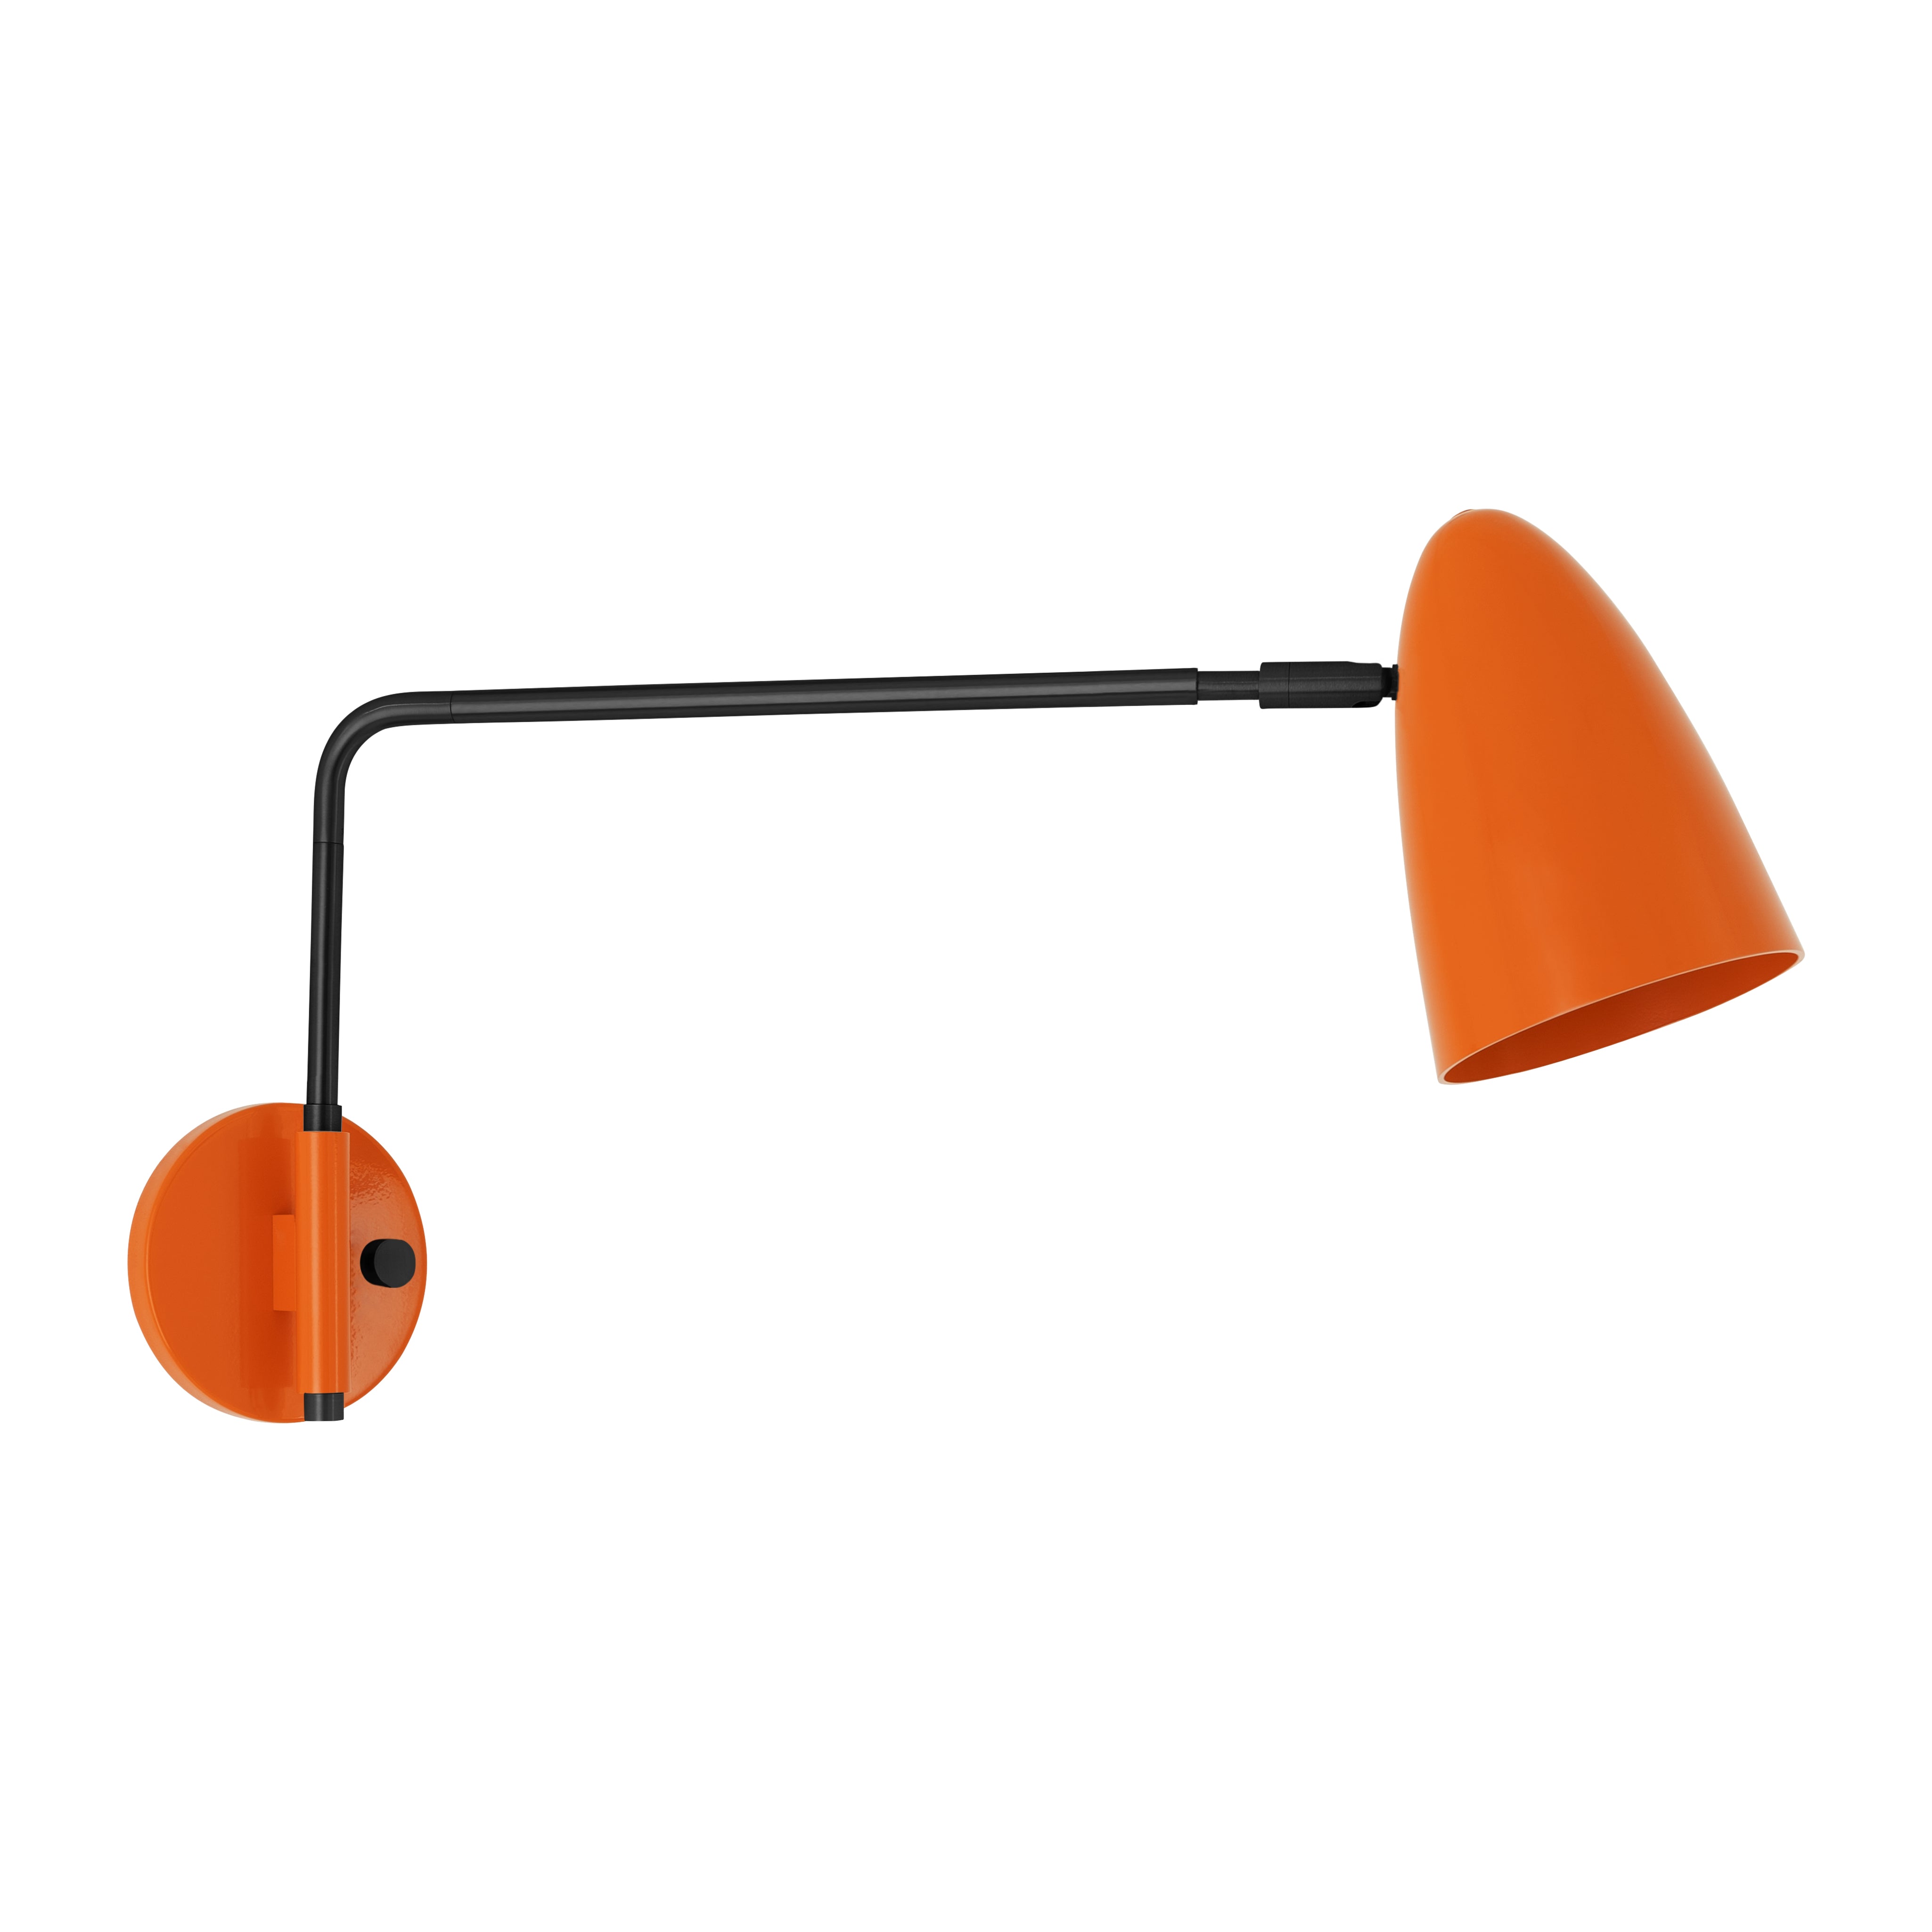 Black and orange color Boom Swing Arm sconce Dutton Brown lighting